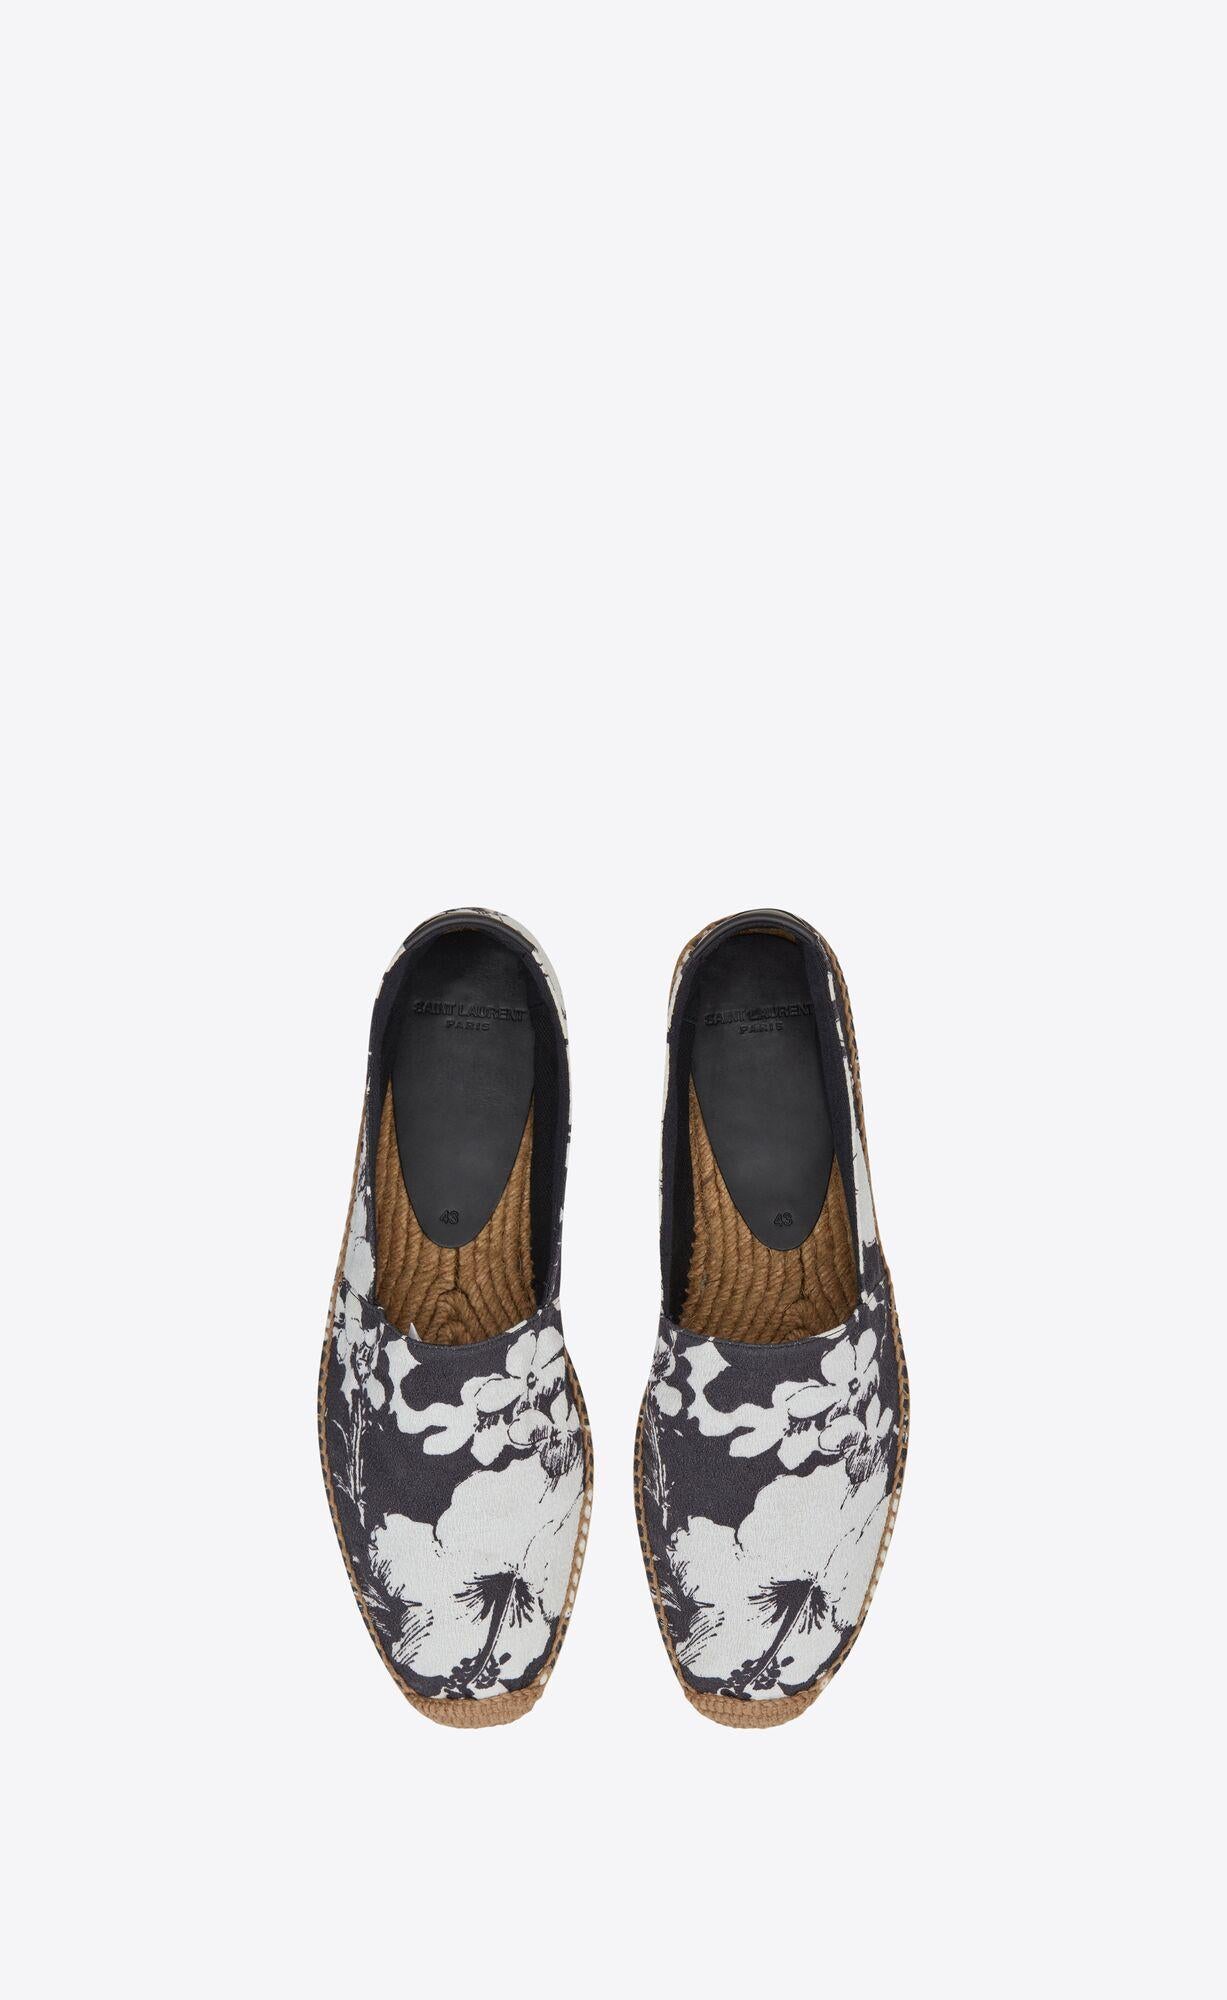 Saint Laurent Mens Black & White Hibiscus Floral Print Espadrille

With summertime around the corner, it's time to get the espadrilles out. This pair from Saint Laurent is printed with hibiscus floral motifs and has a braided raffia outsole. Embrace